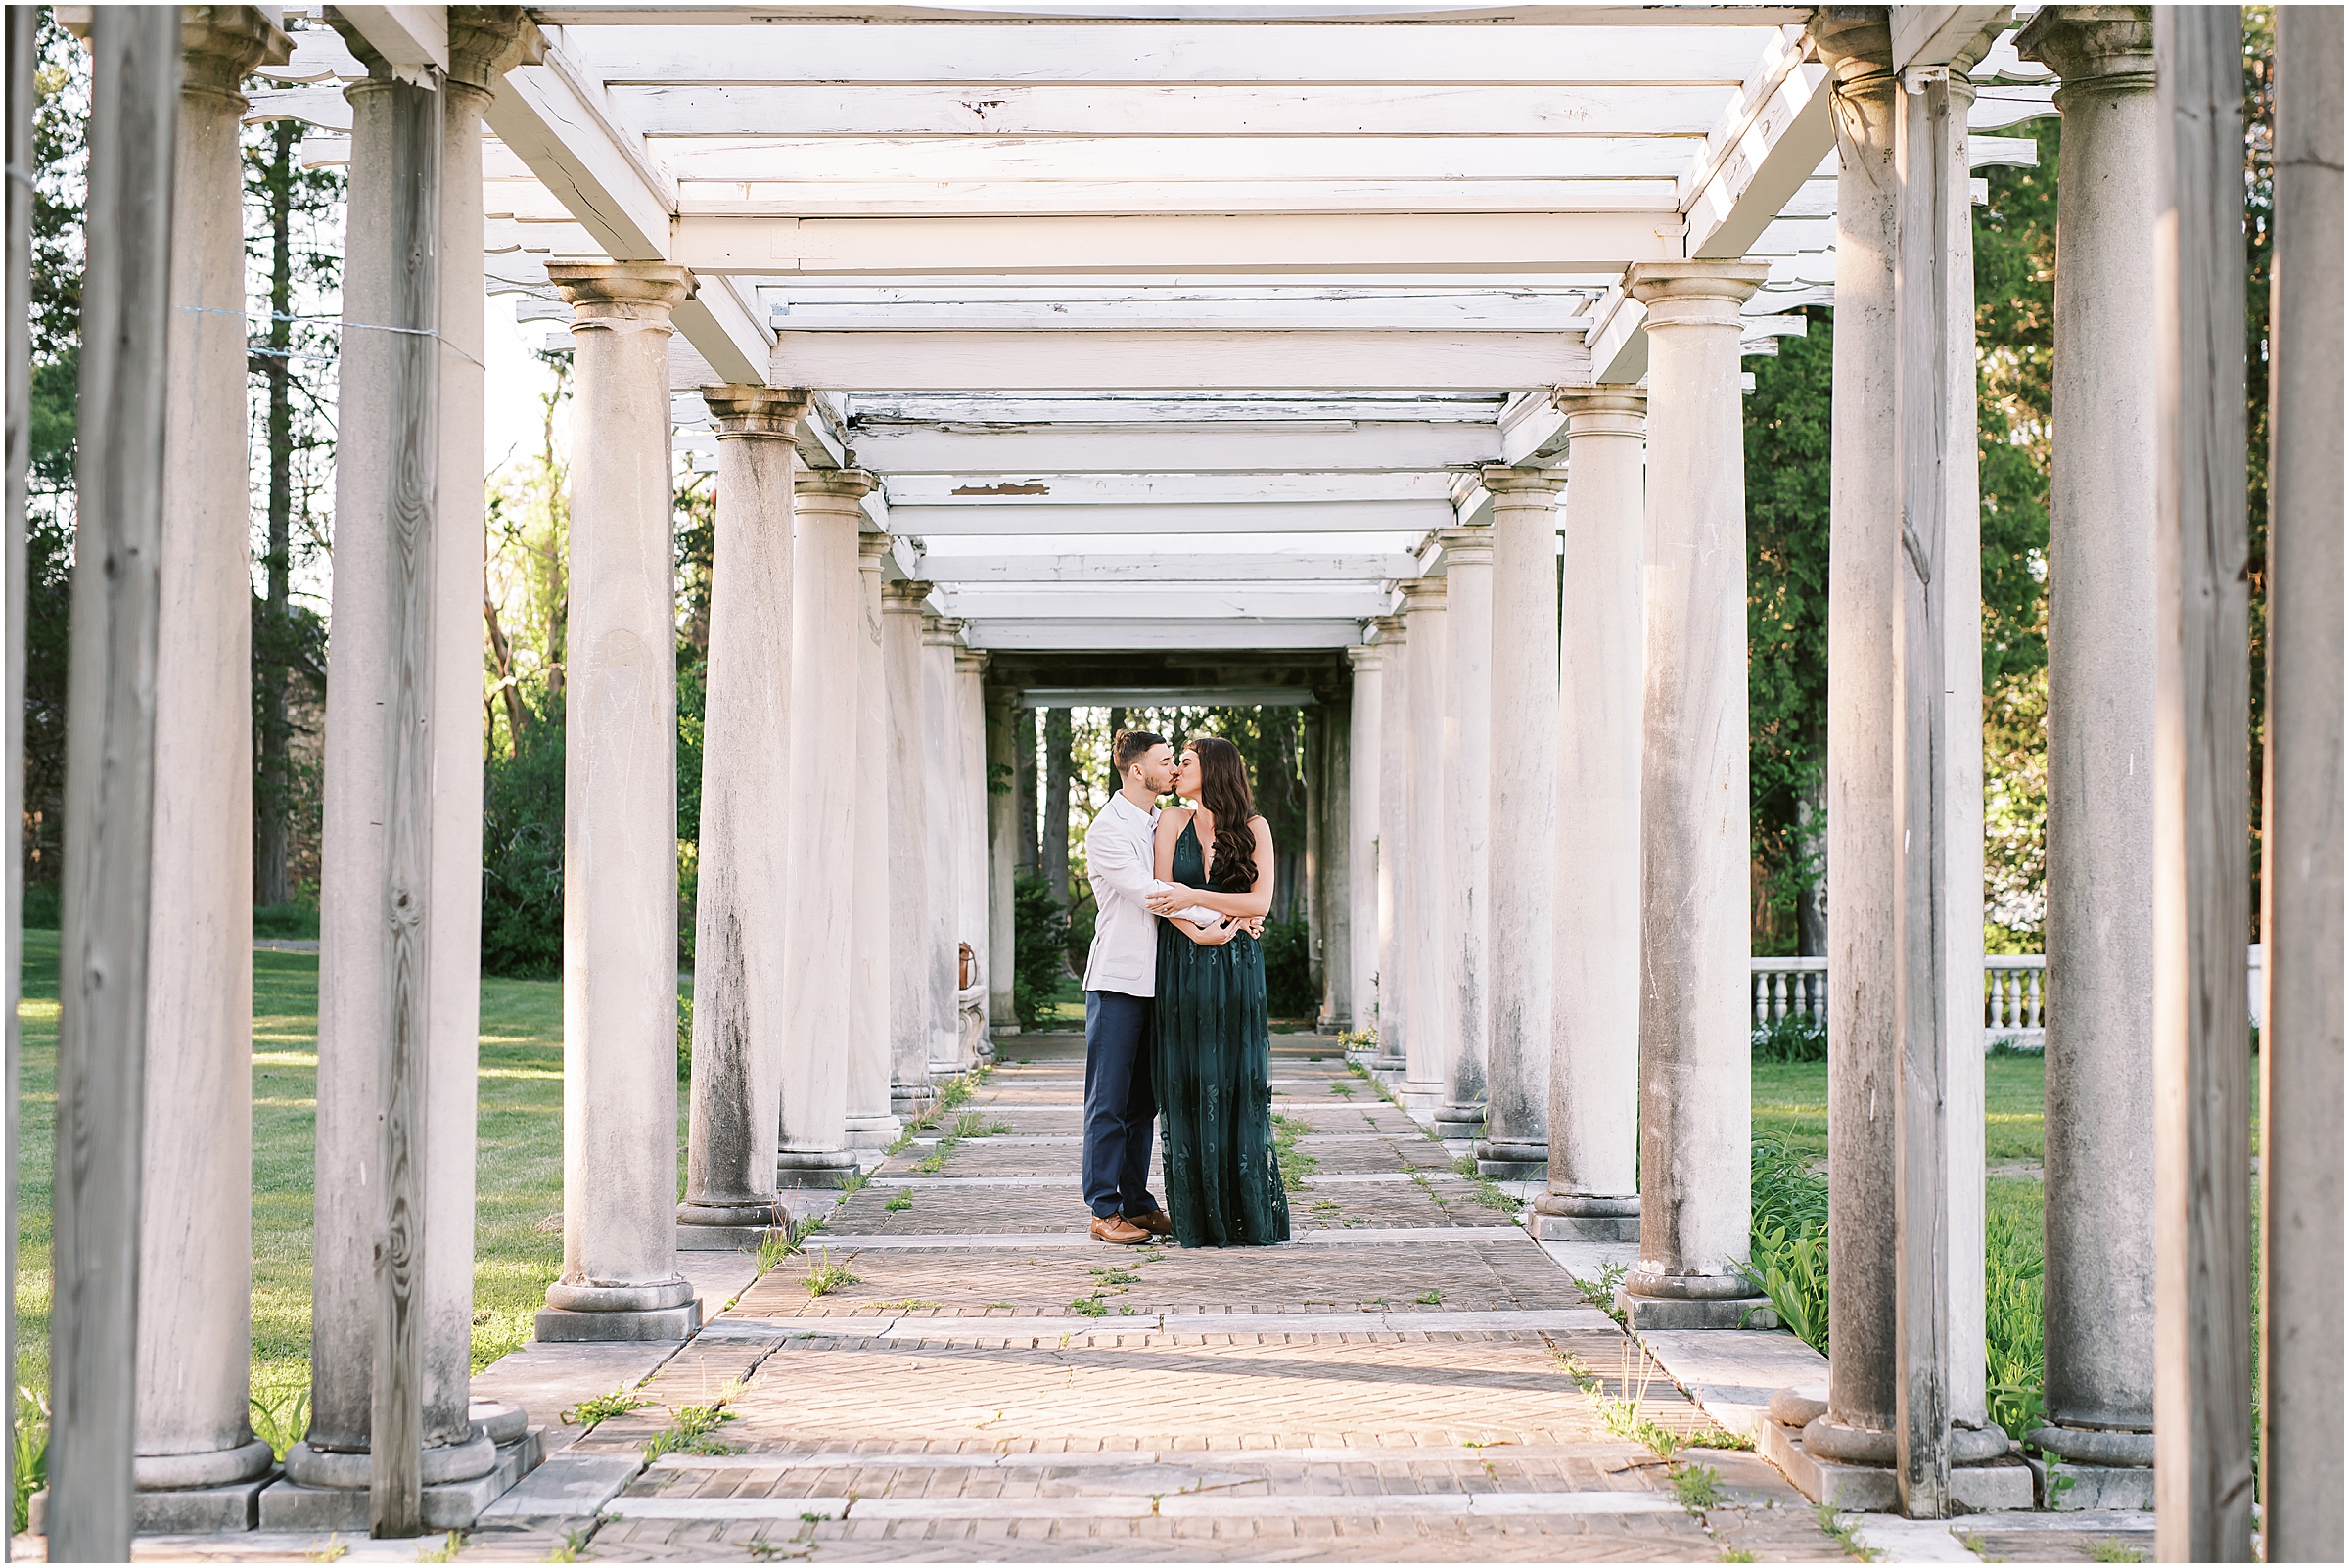 Engagement session at Swannanoa Palace